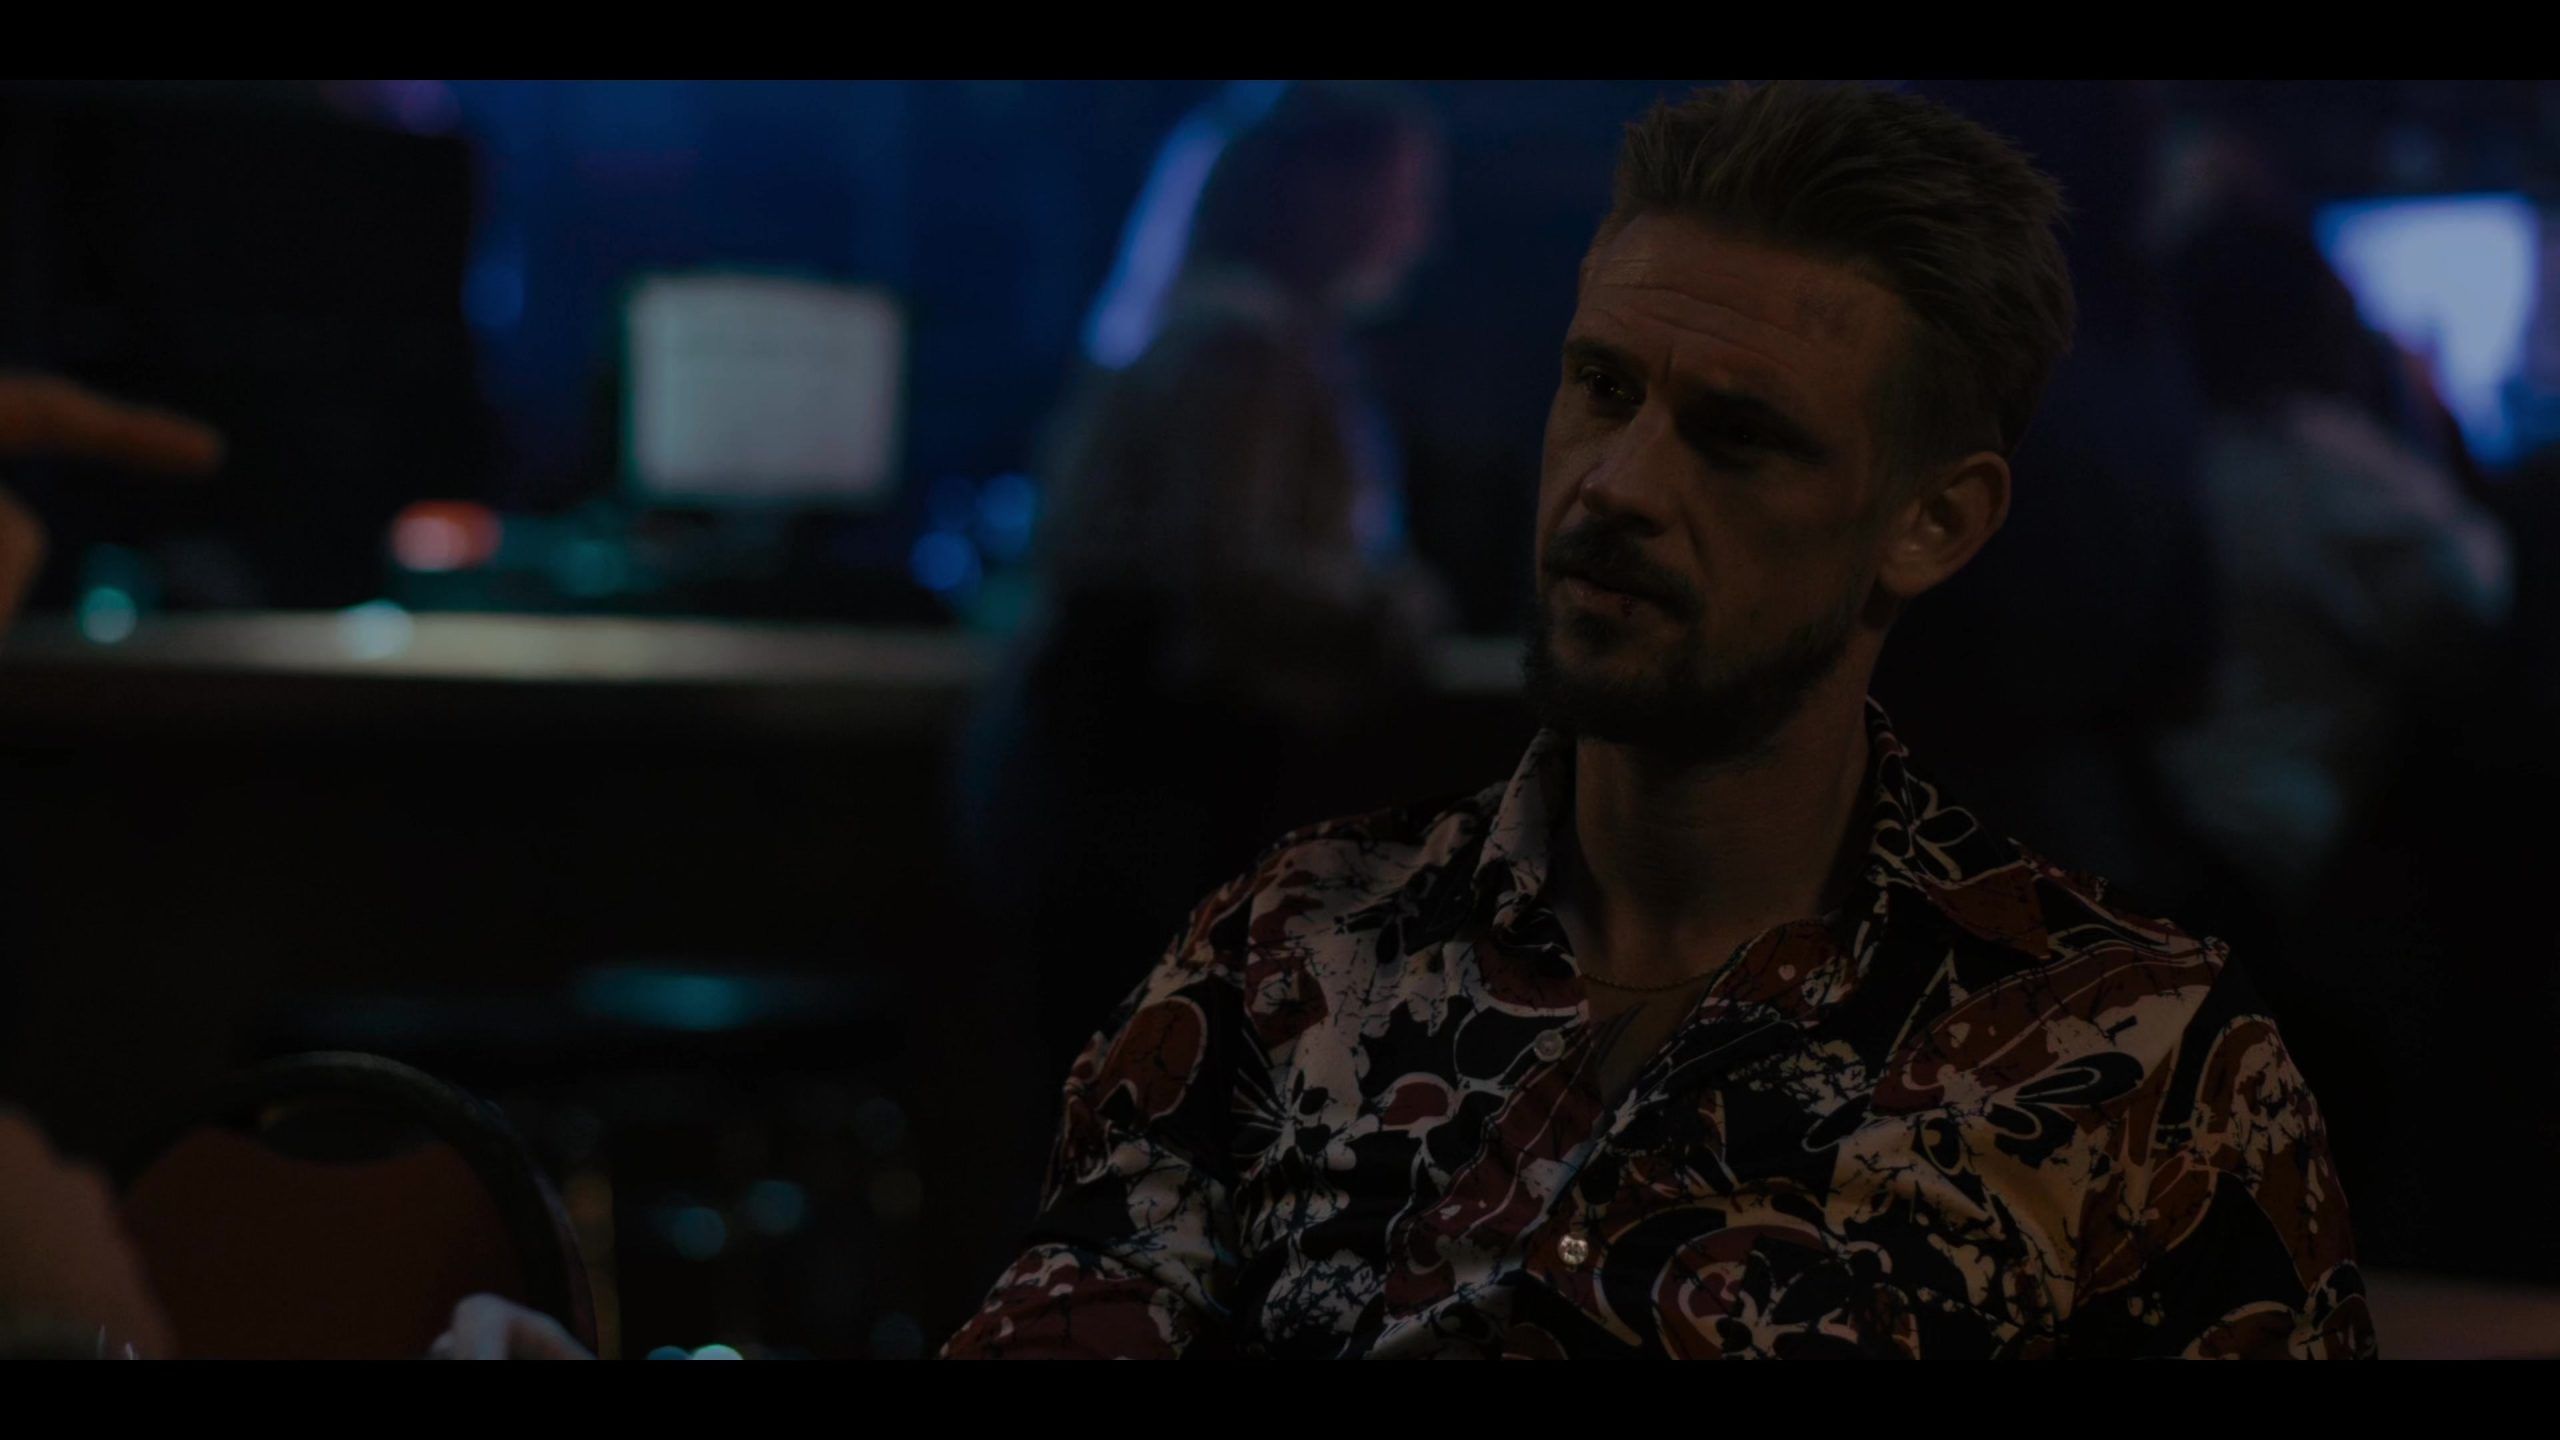 Worn on Justified: City Primeval TV Show - Long Sleeve Shirt of Boyd Holbrook as Clement Mansel, aka The Oklahoma Wildman